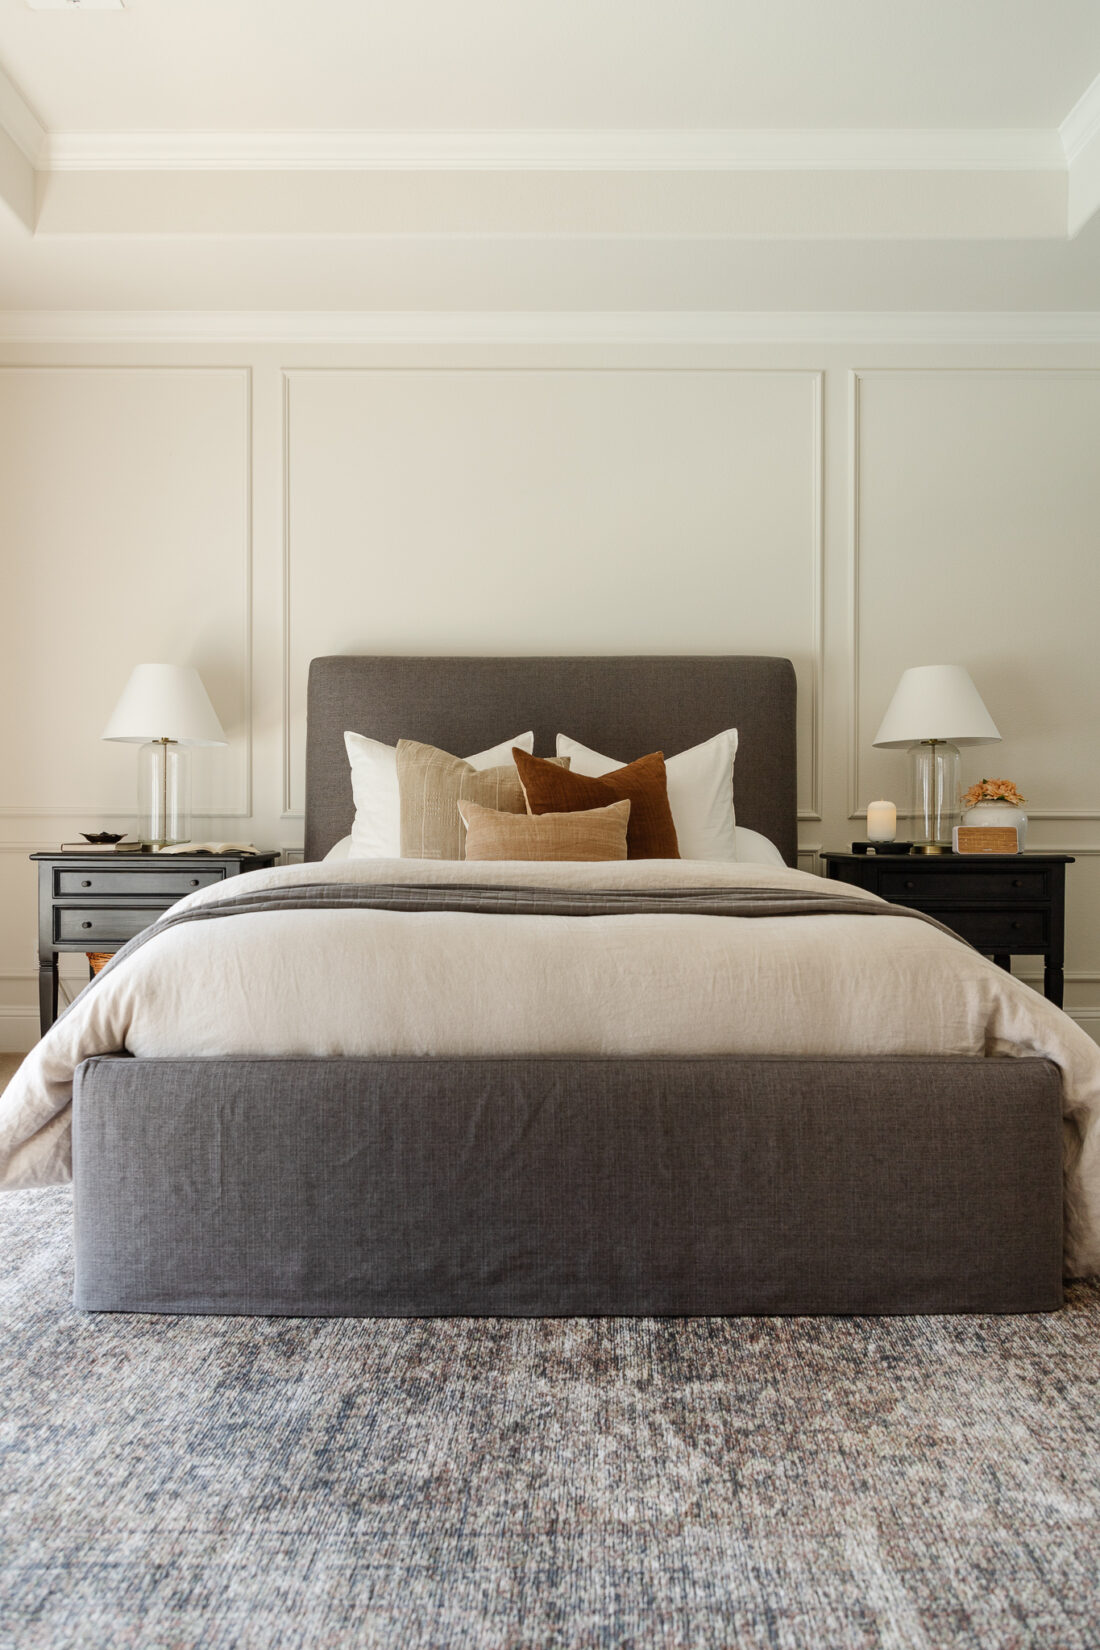 How to Build an Upholstered Bed